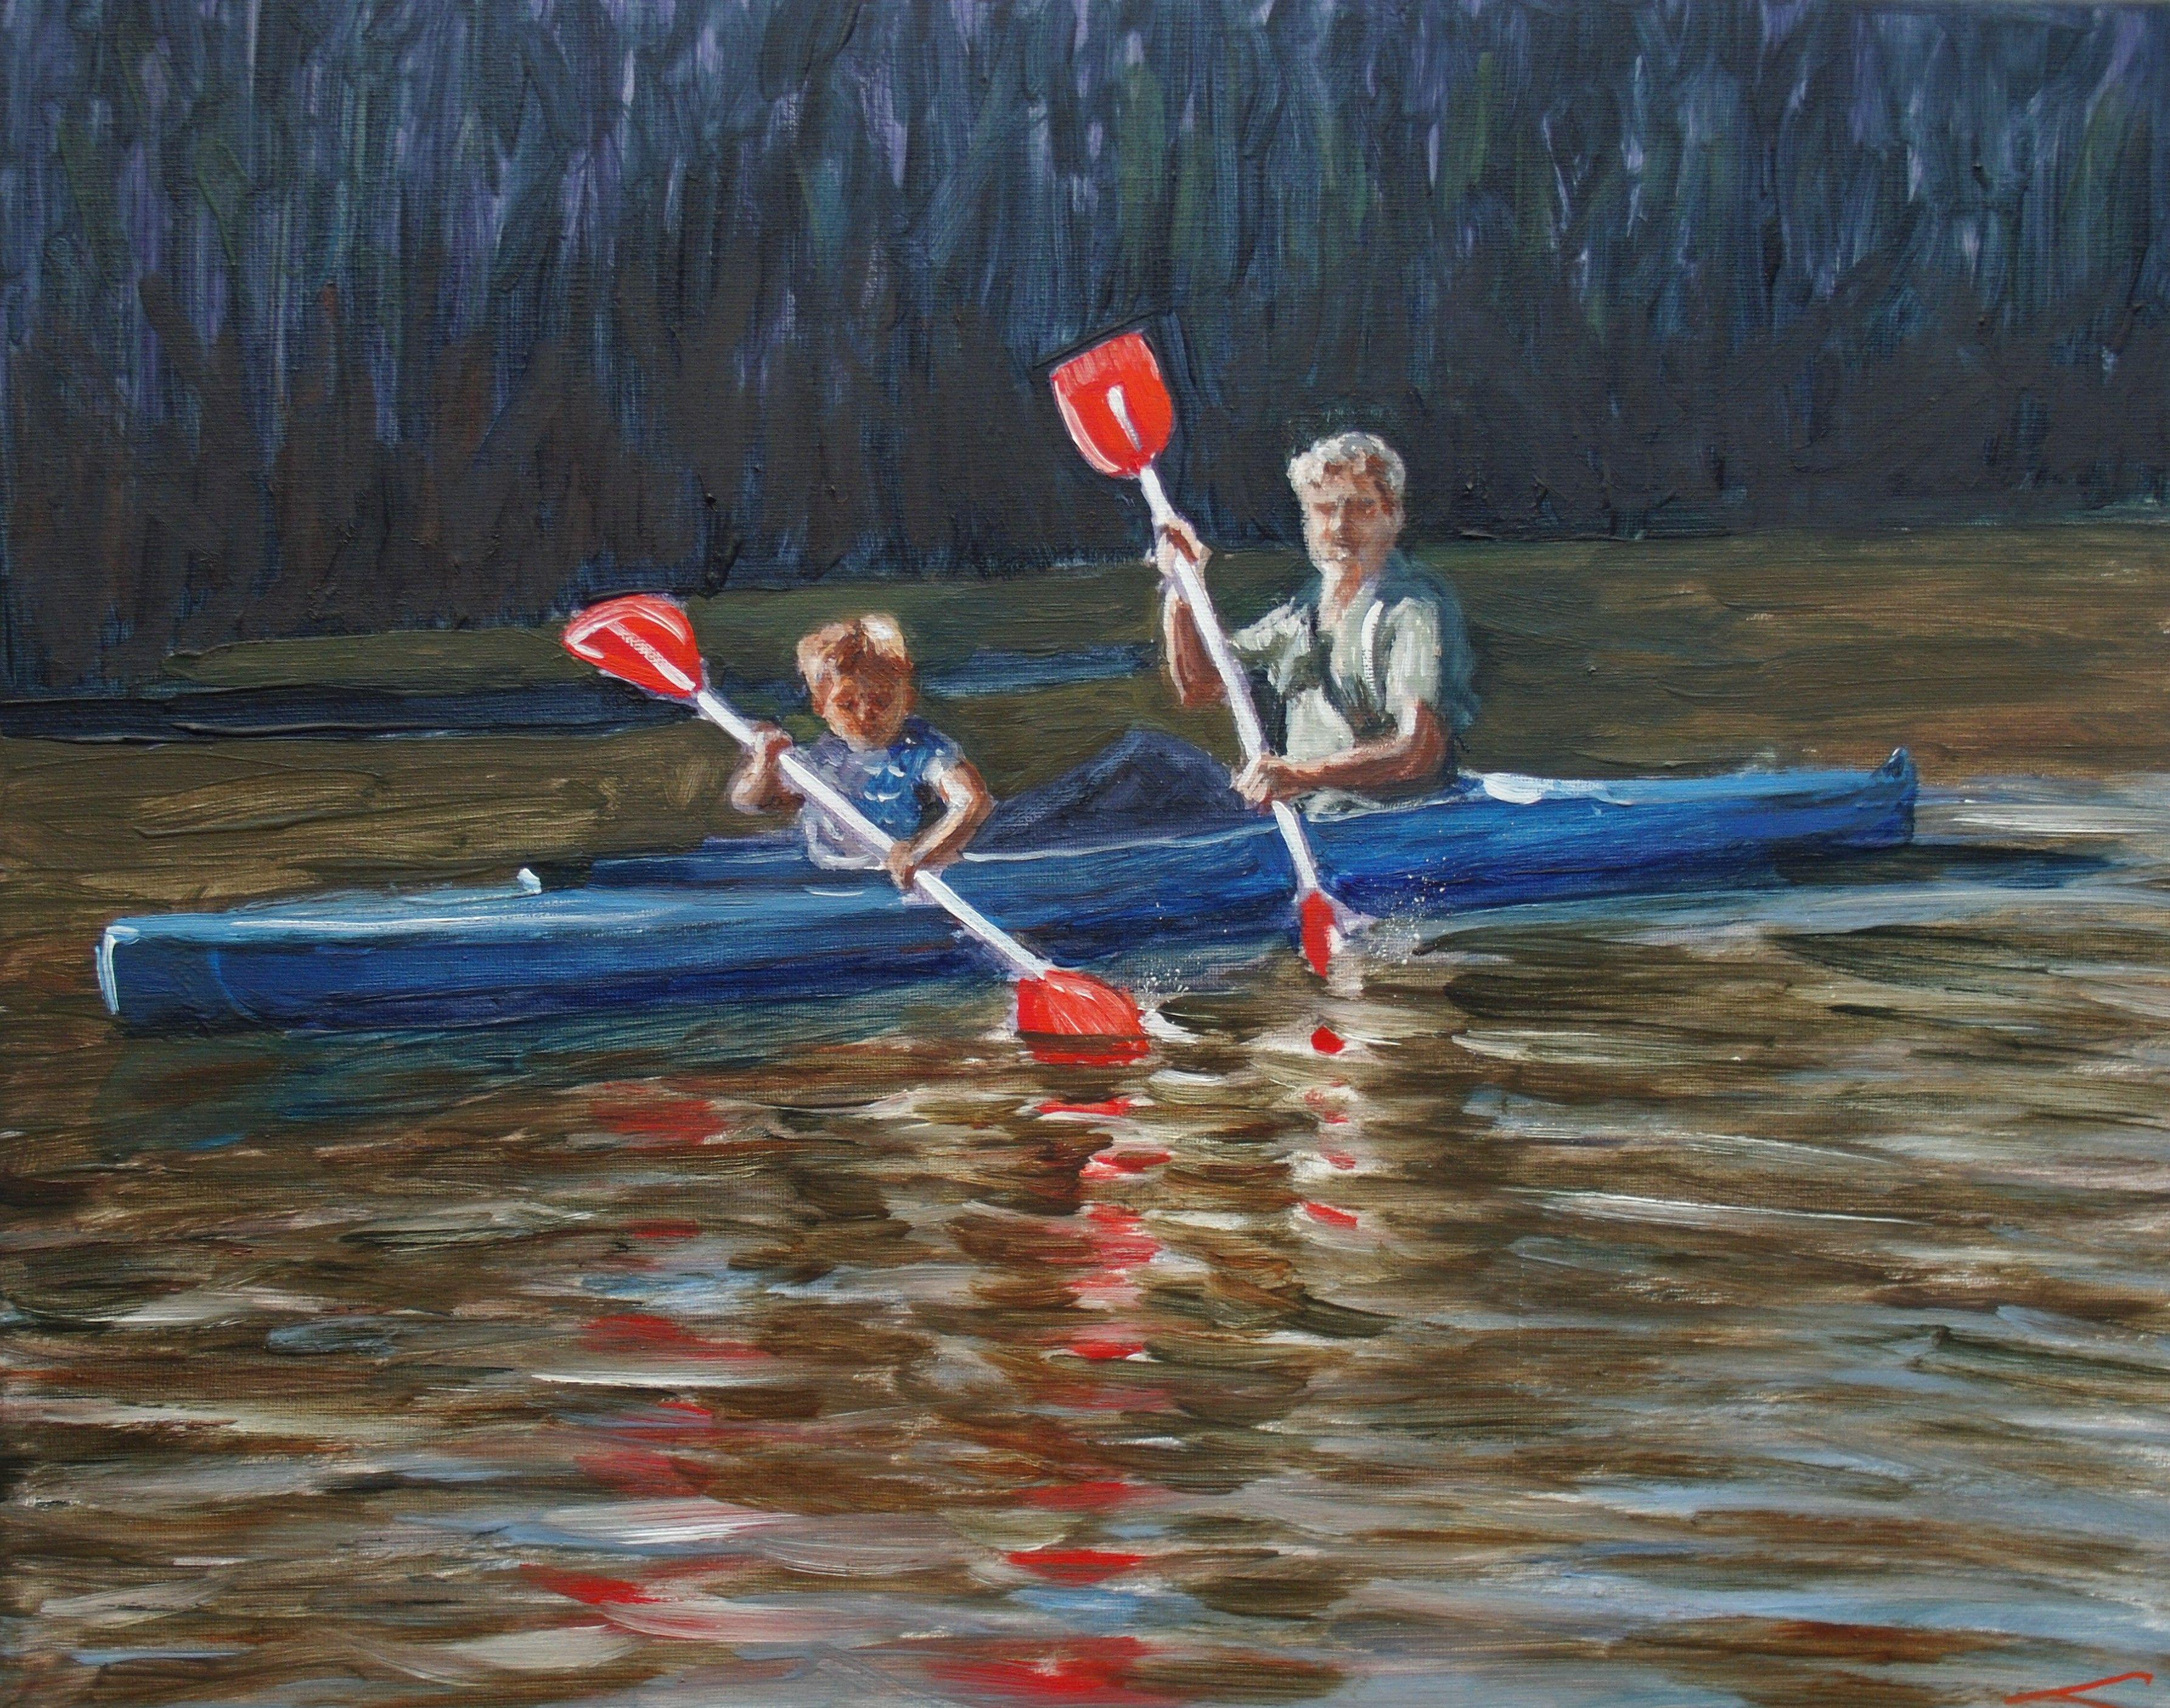 A man and a boy in the boat going along the channel, painted by oil on canvas. :: Painting :: Impressionist :: This piece comes with an official certificate of authenticity signed by the artist :: Ready to Hang: Yes :: Signed: Yes :: Signature